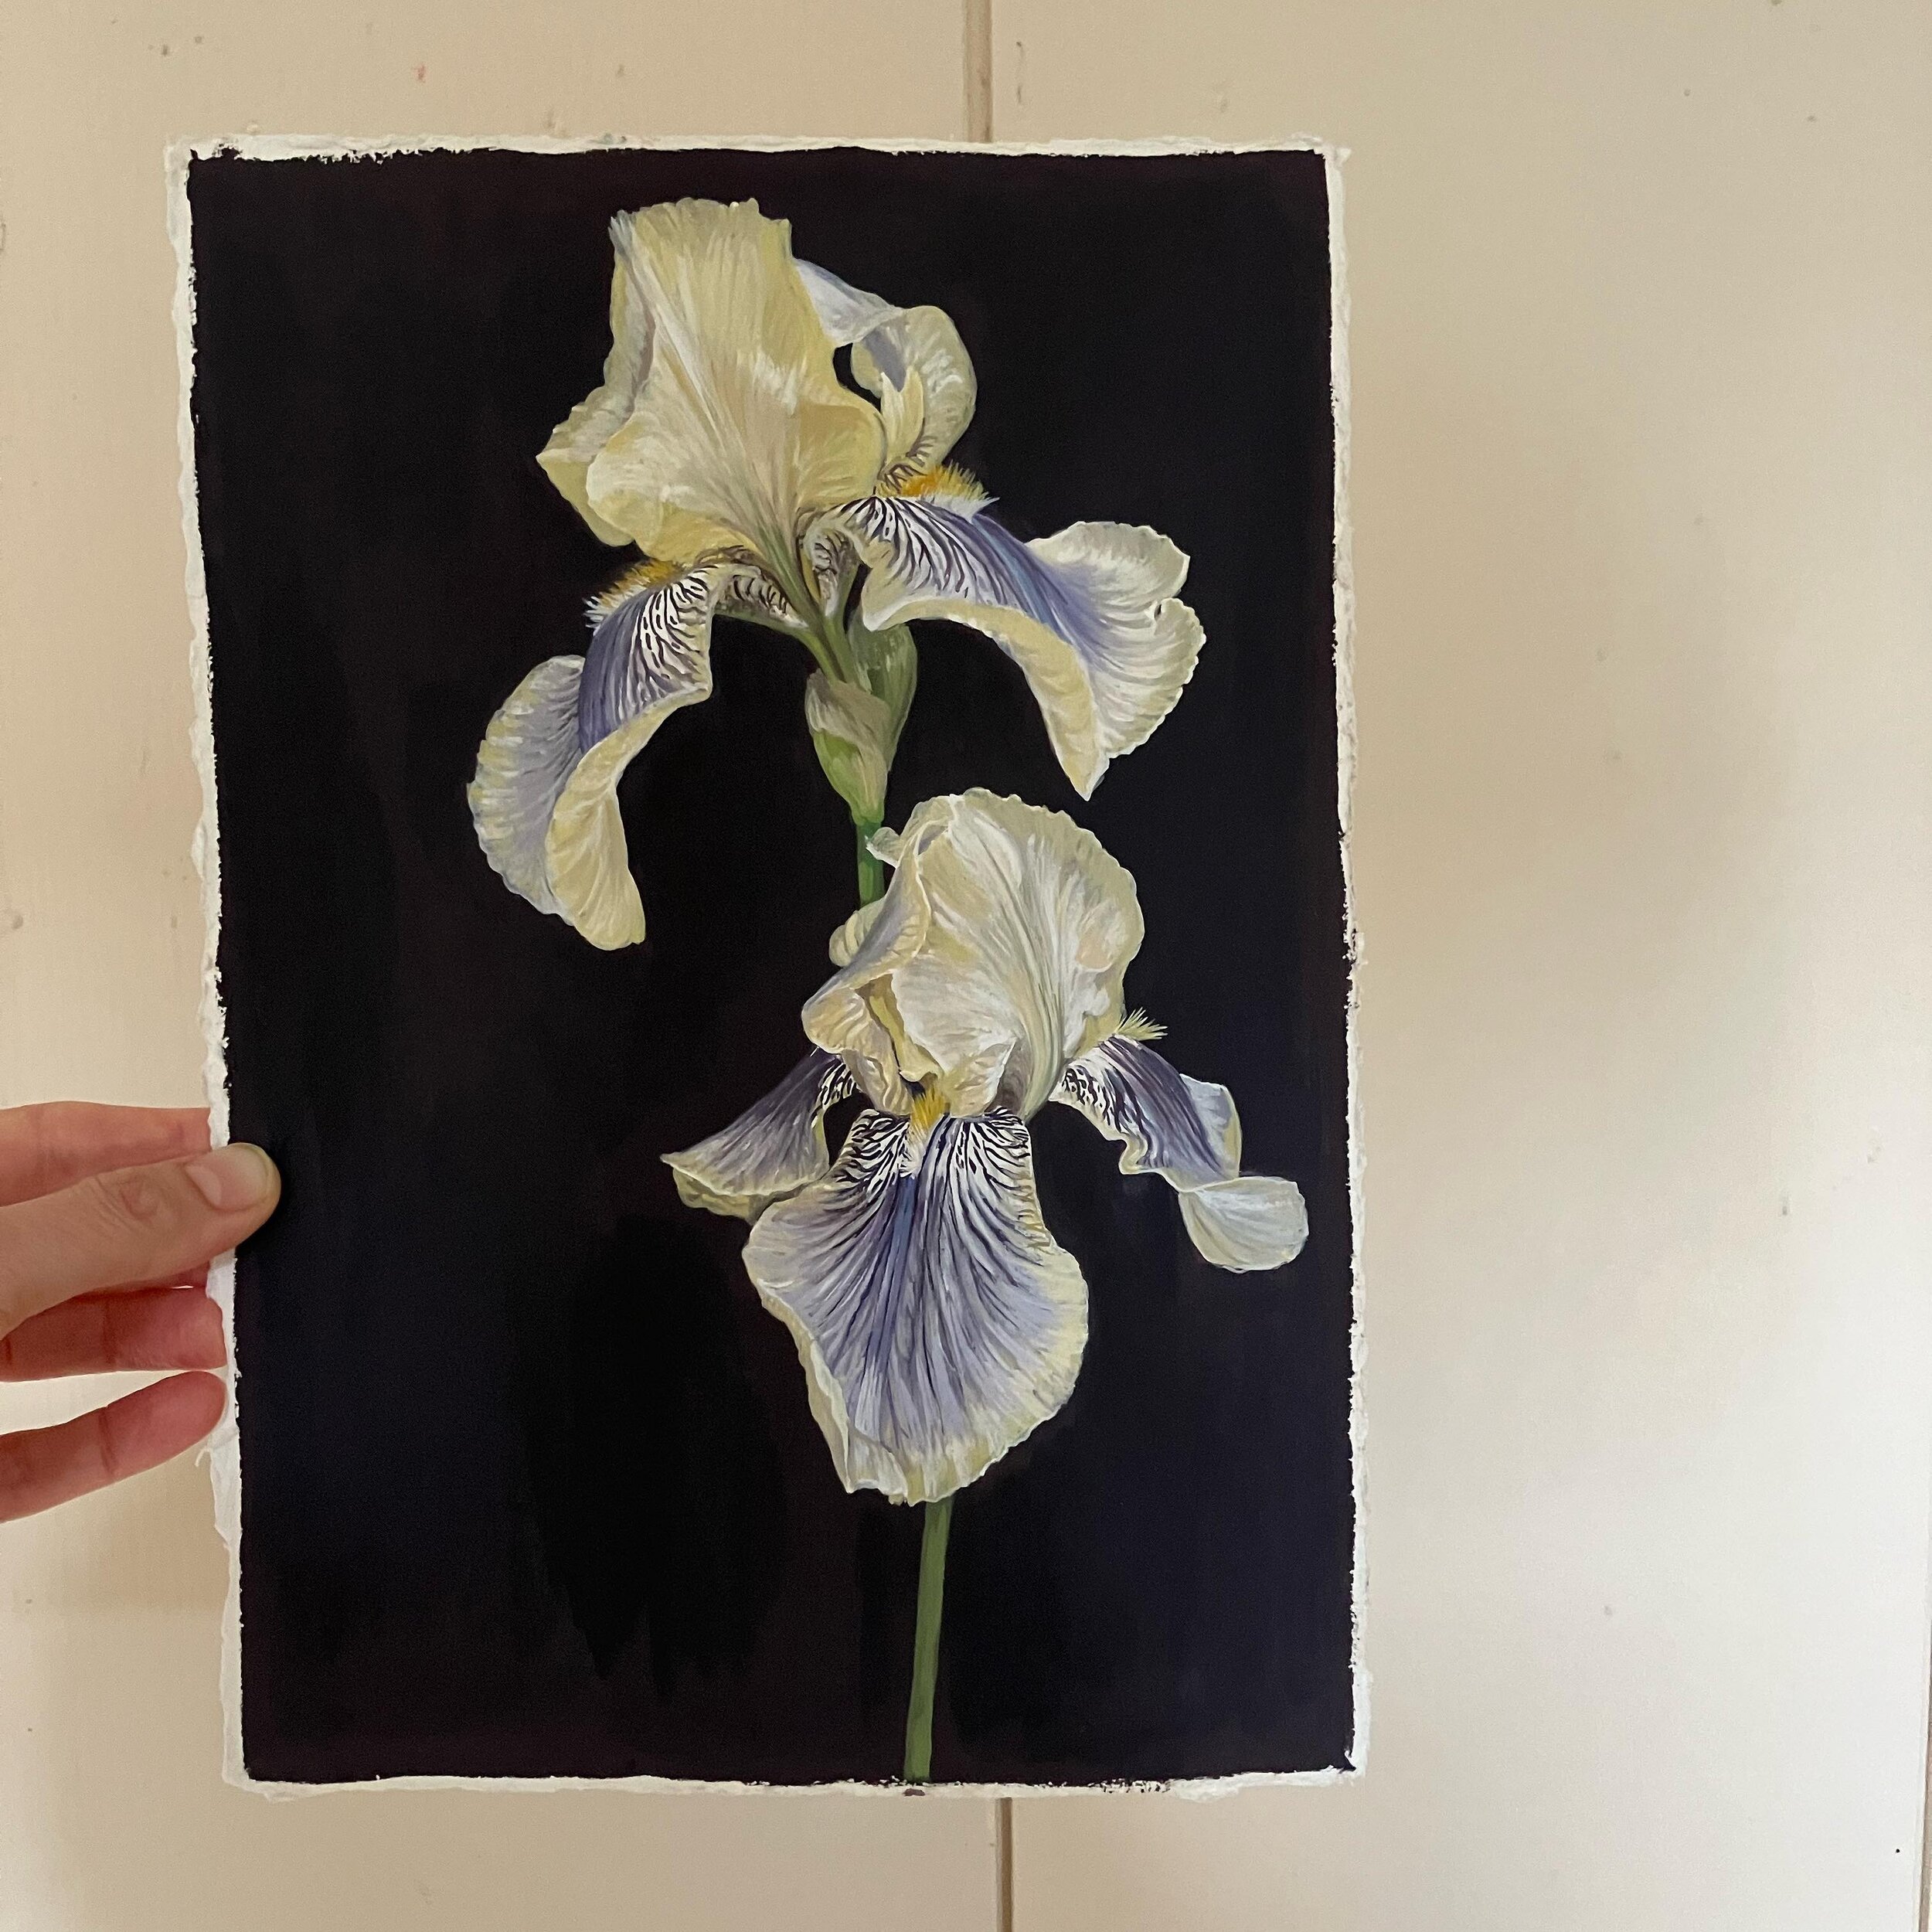 Some more speckles and stripes&hellip; and finished. 

This painting is available and will be heading to my website tomorrow. Please DM for more details if interested.

#irisbentonolive #beardediris #floralart #emergingartist